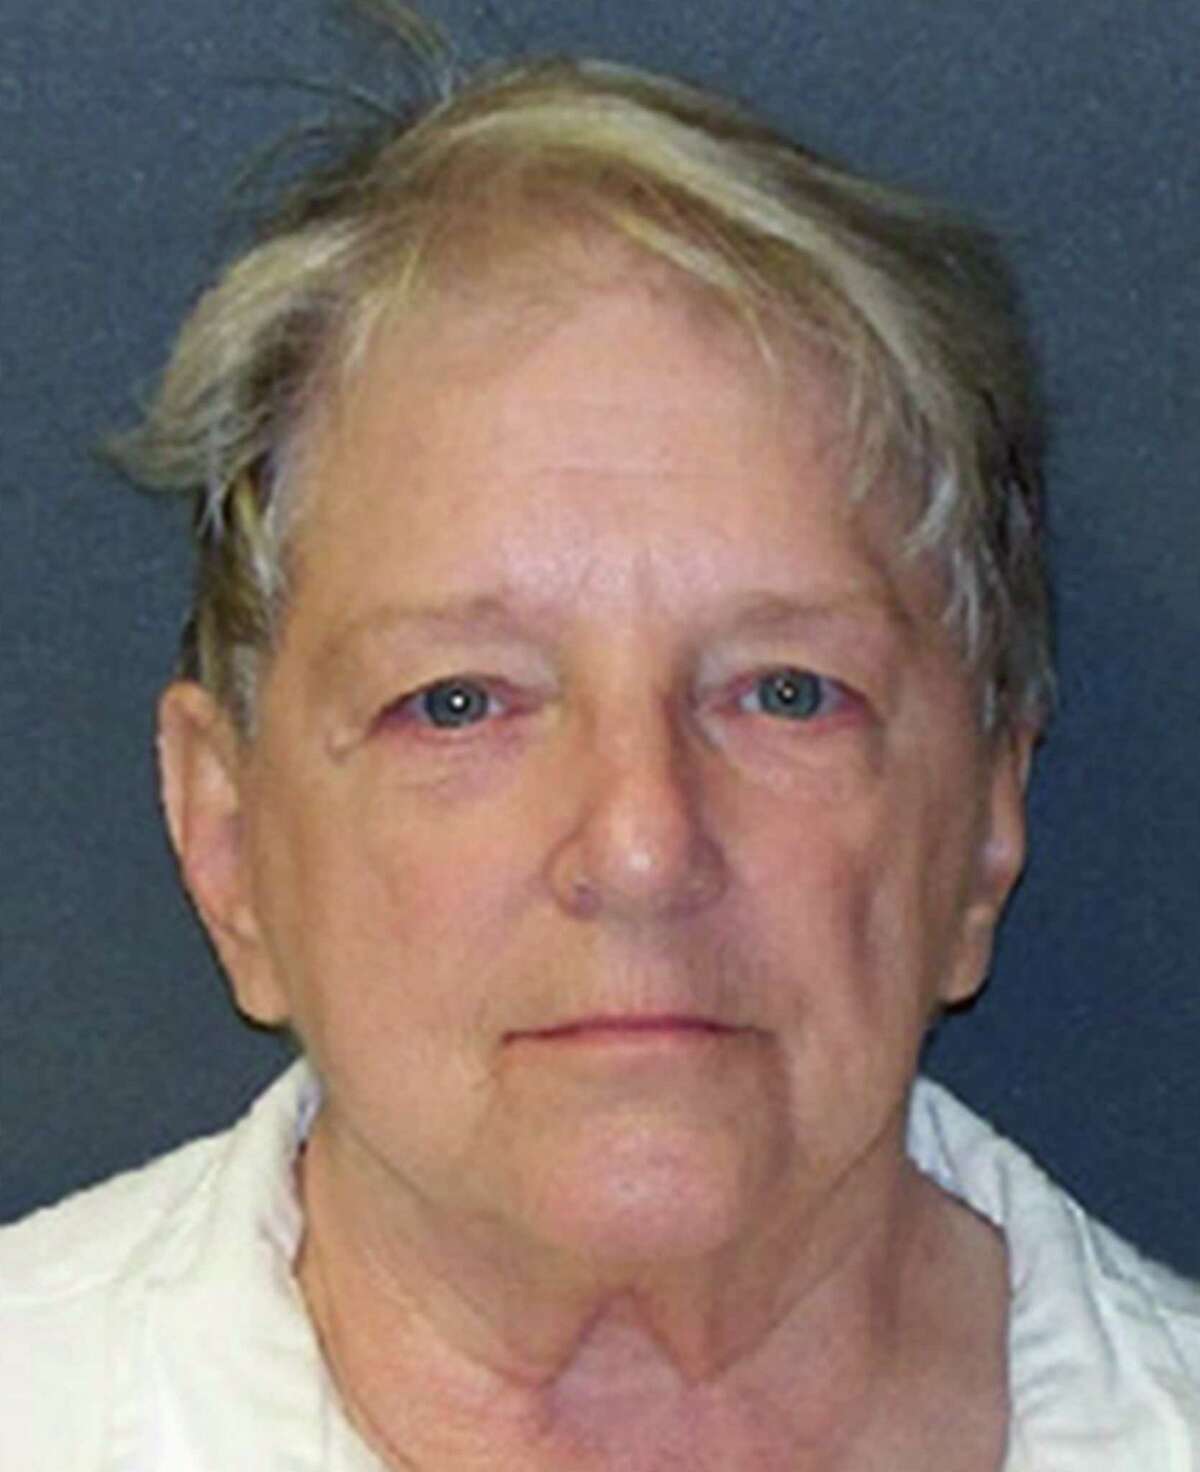 FILE - This undated file photo provided by the Texas Department of Criminal Justice shows Genene Jones. The former Texas nurse who prosecutors said may be responsible for the deaths of up to 60 young children has been indicted on a murder charge for the second time in recent weeks. Prosecutors in San Antonio said in a statement that 66-year-old Jones was indicted Wednesday, June 21, 2017, in the 1981 death of 2-year-old Rosemary Vega. She was charged with a separate count of murder last month in the death of an 11-month-old boy. (Texas Department of Criminal Justice via AP, File)